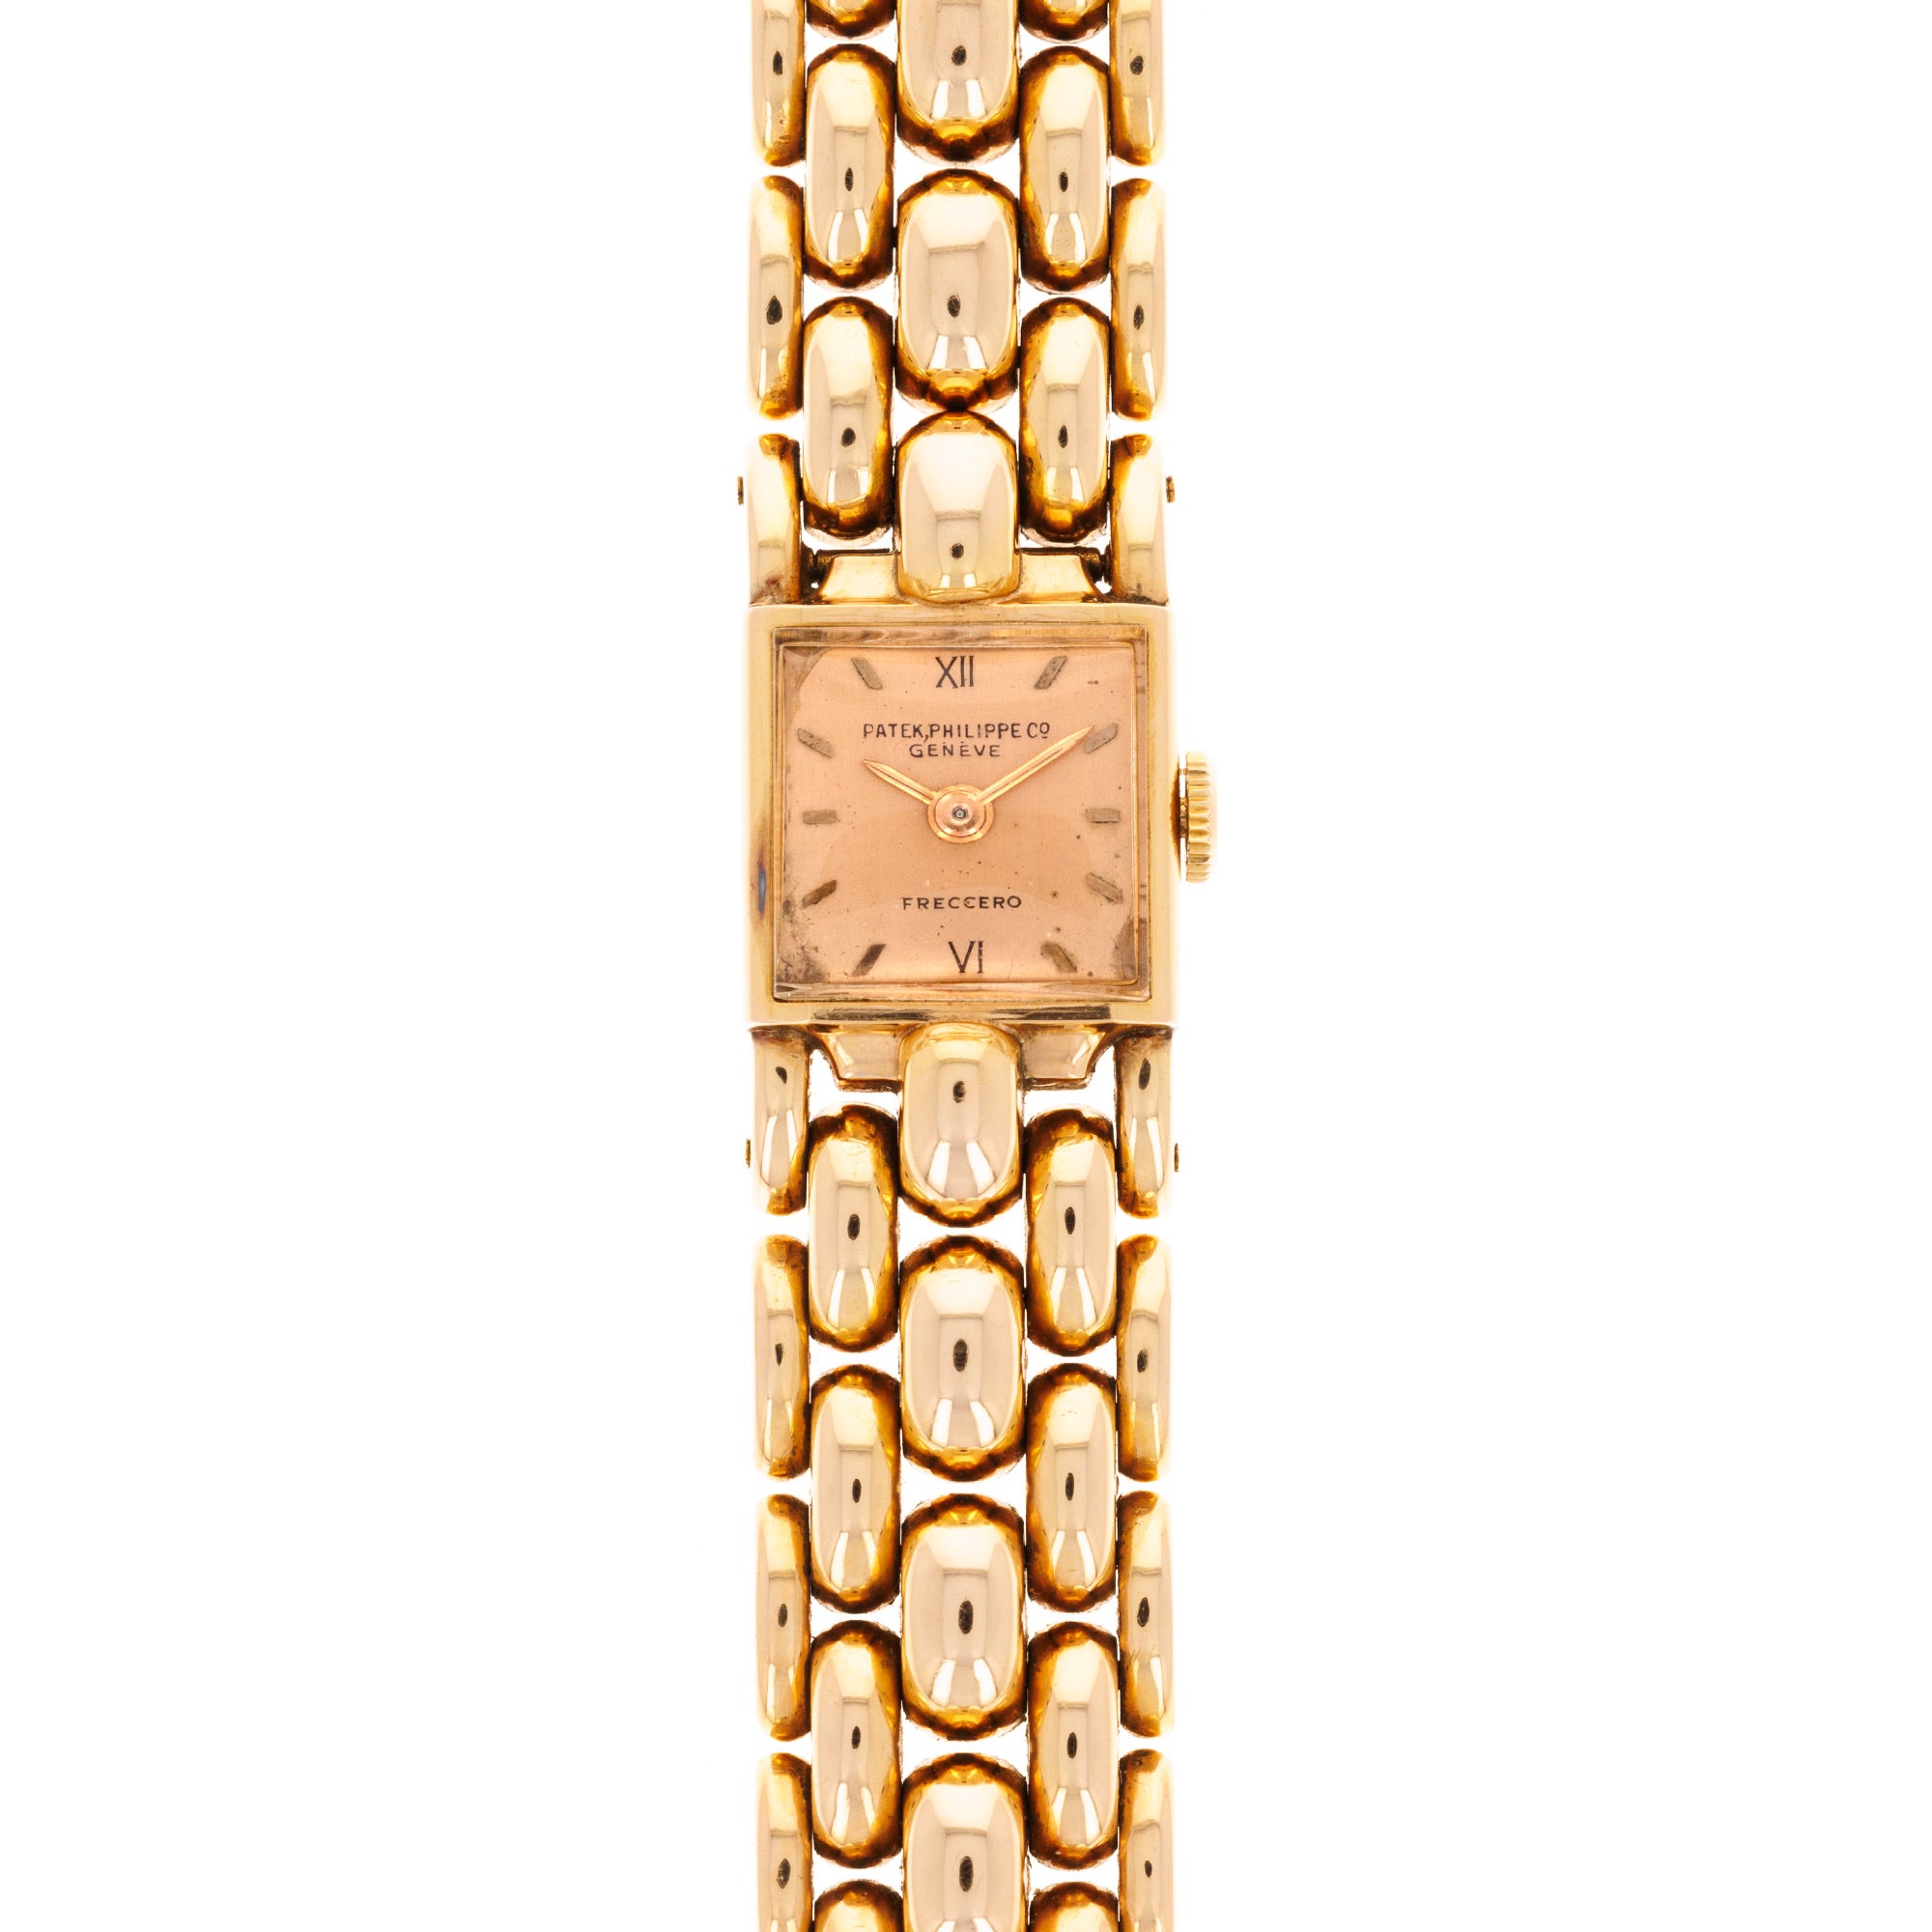 Patek Philippe - Patek Philippe Rose Gold Bracelet Watch Retailed by Freccero (NEW ARRIVAL) - The Keystone Watches